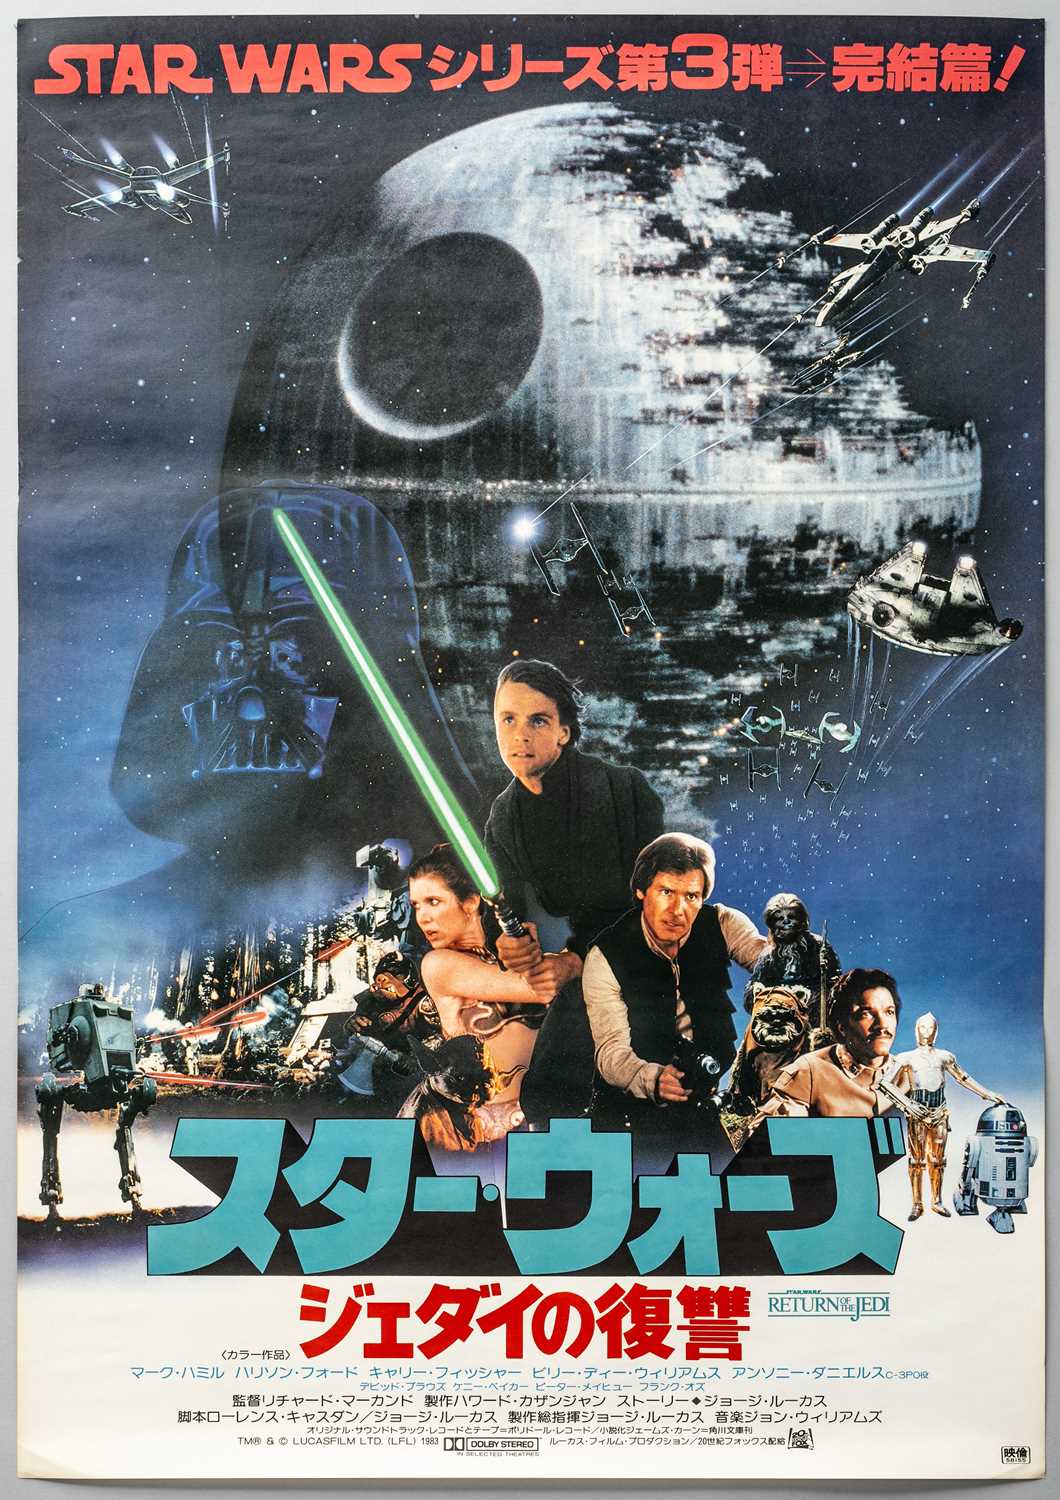 TWO JAPANESE STAR WARS POSTERS SHOWA ERA, 1983 One with a design made of paintings and the other,